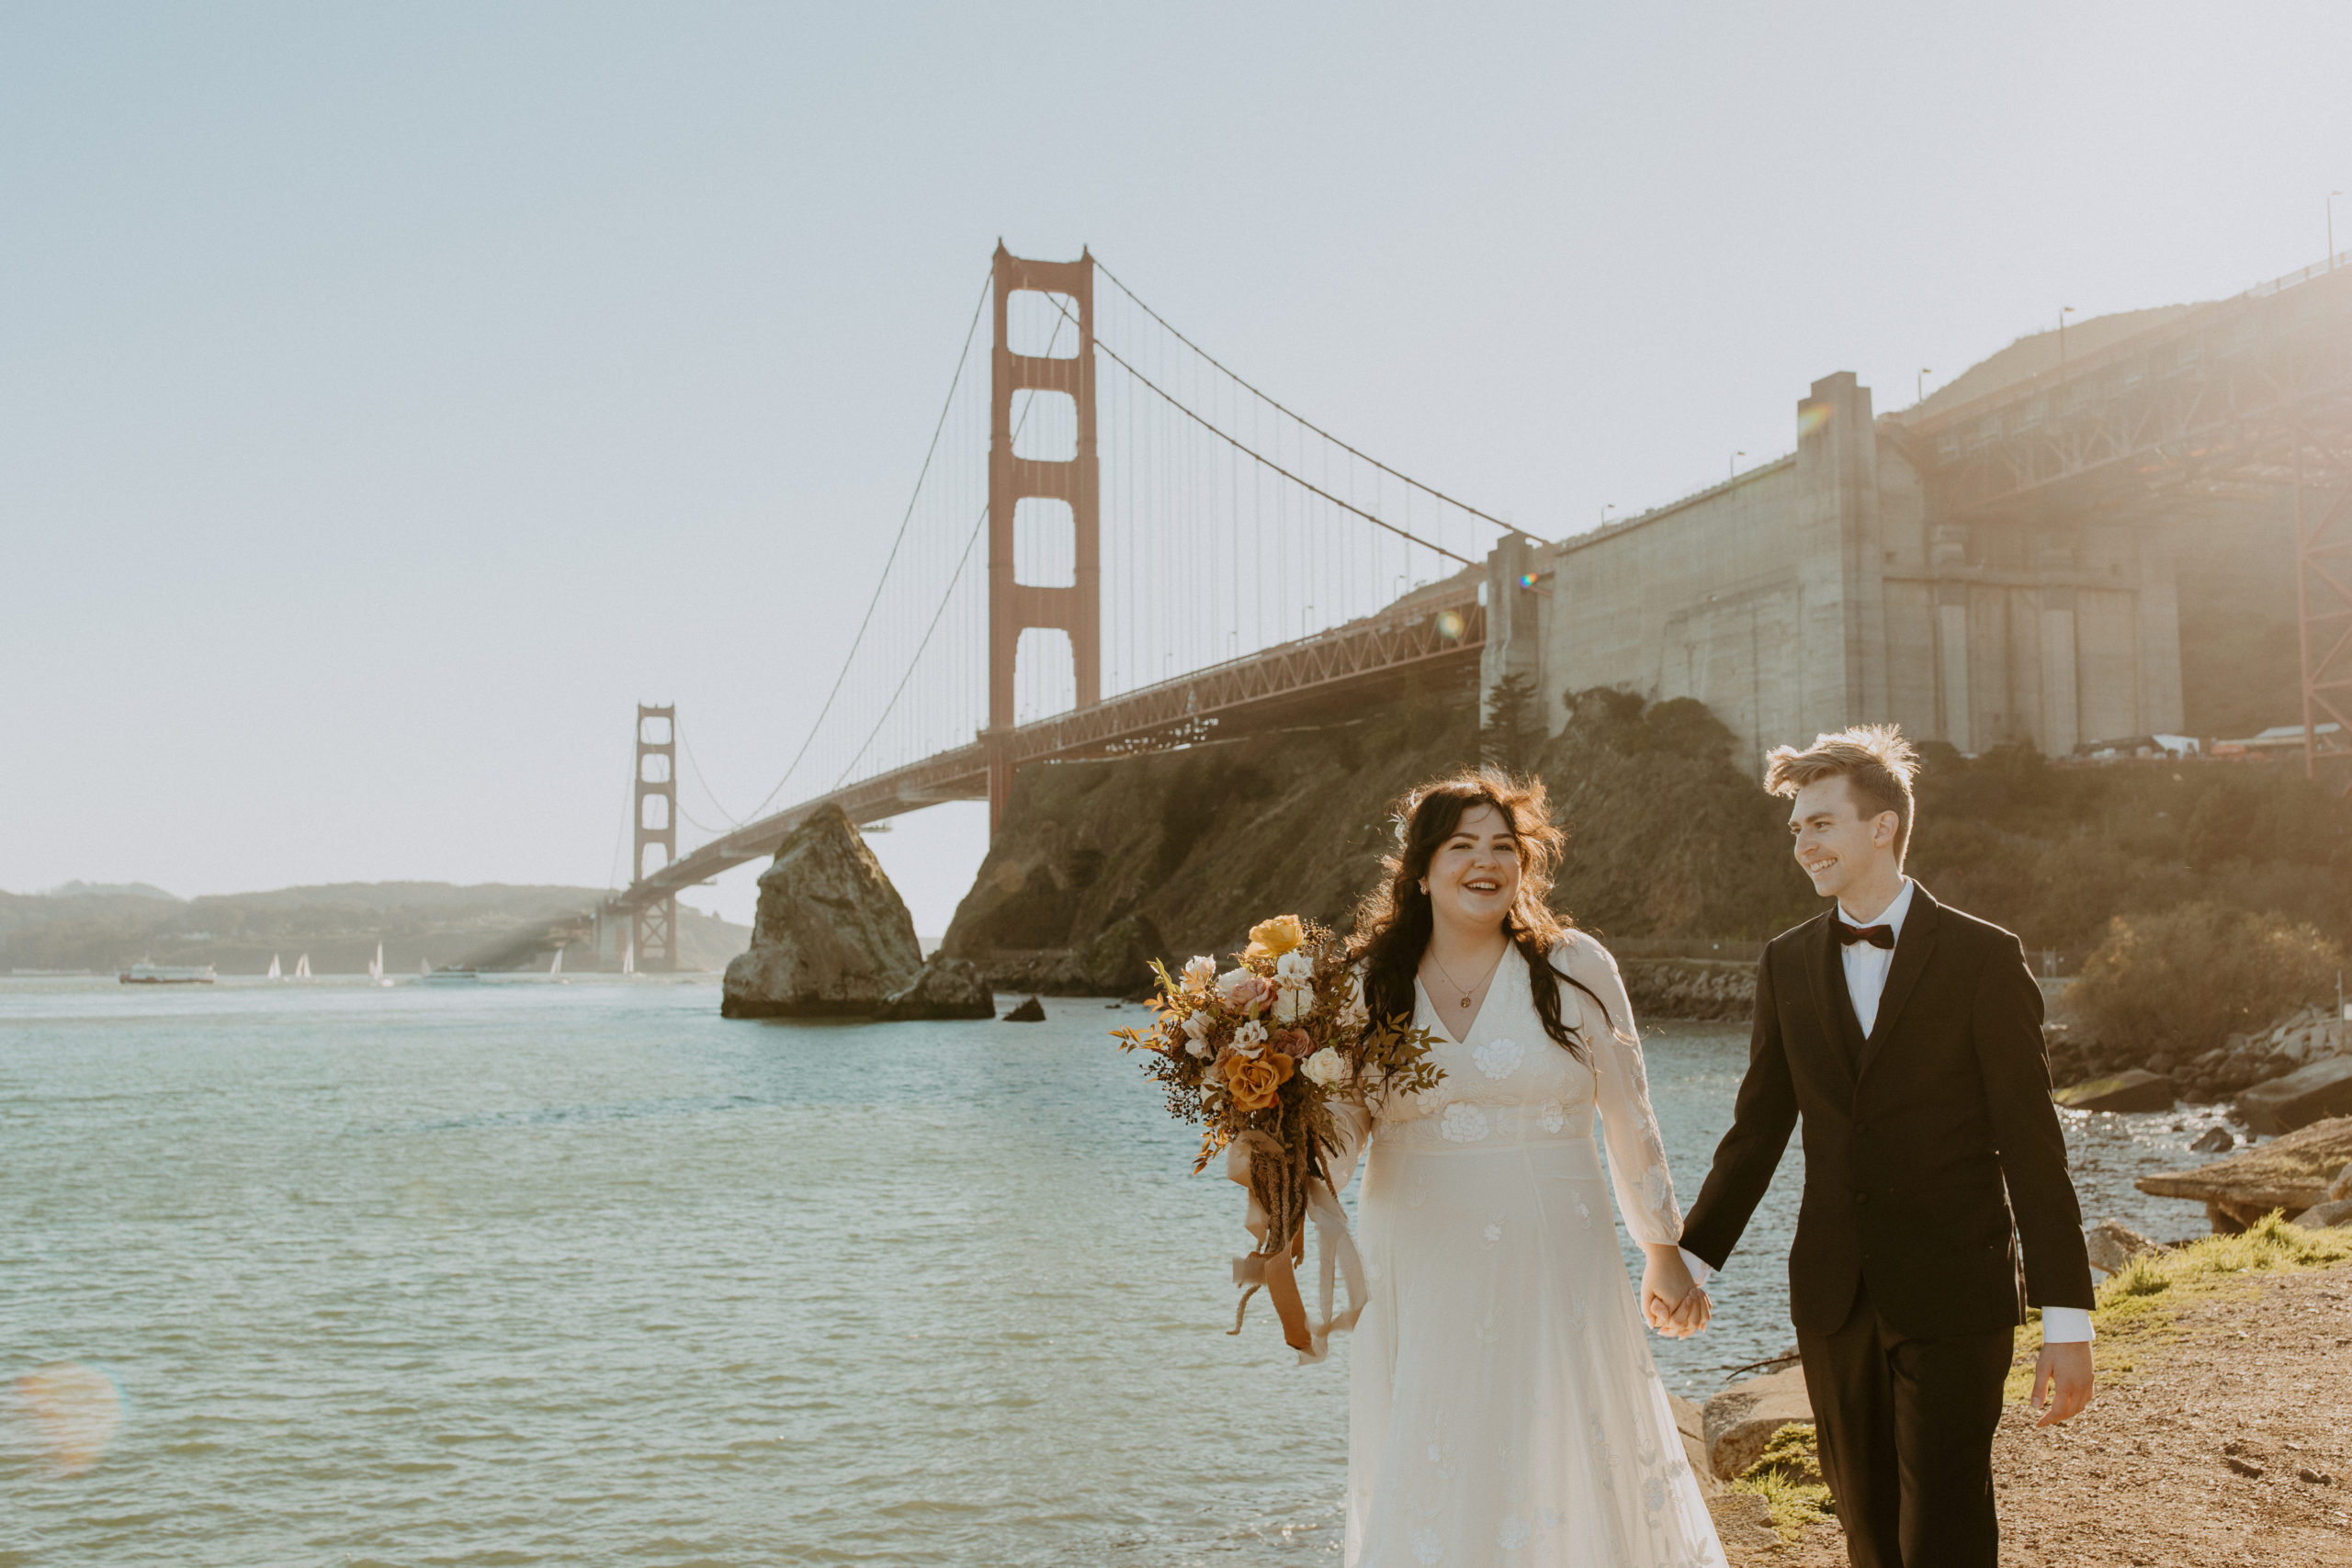 the couple walking away from the Golden Gate Bridge